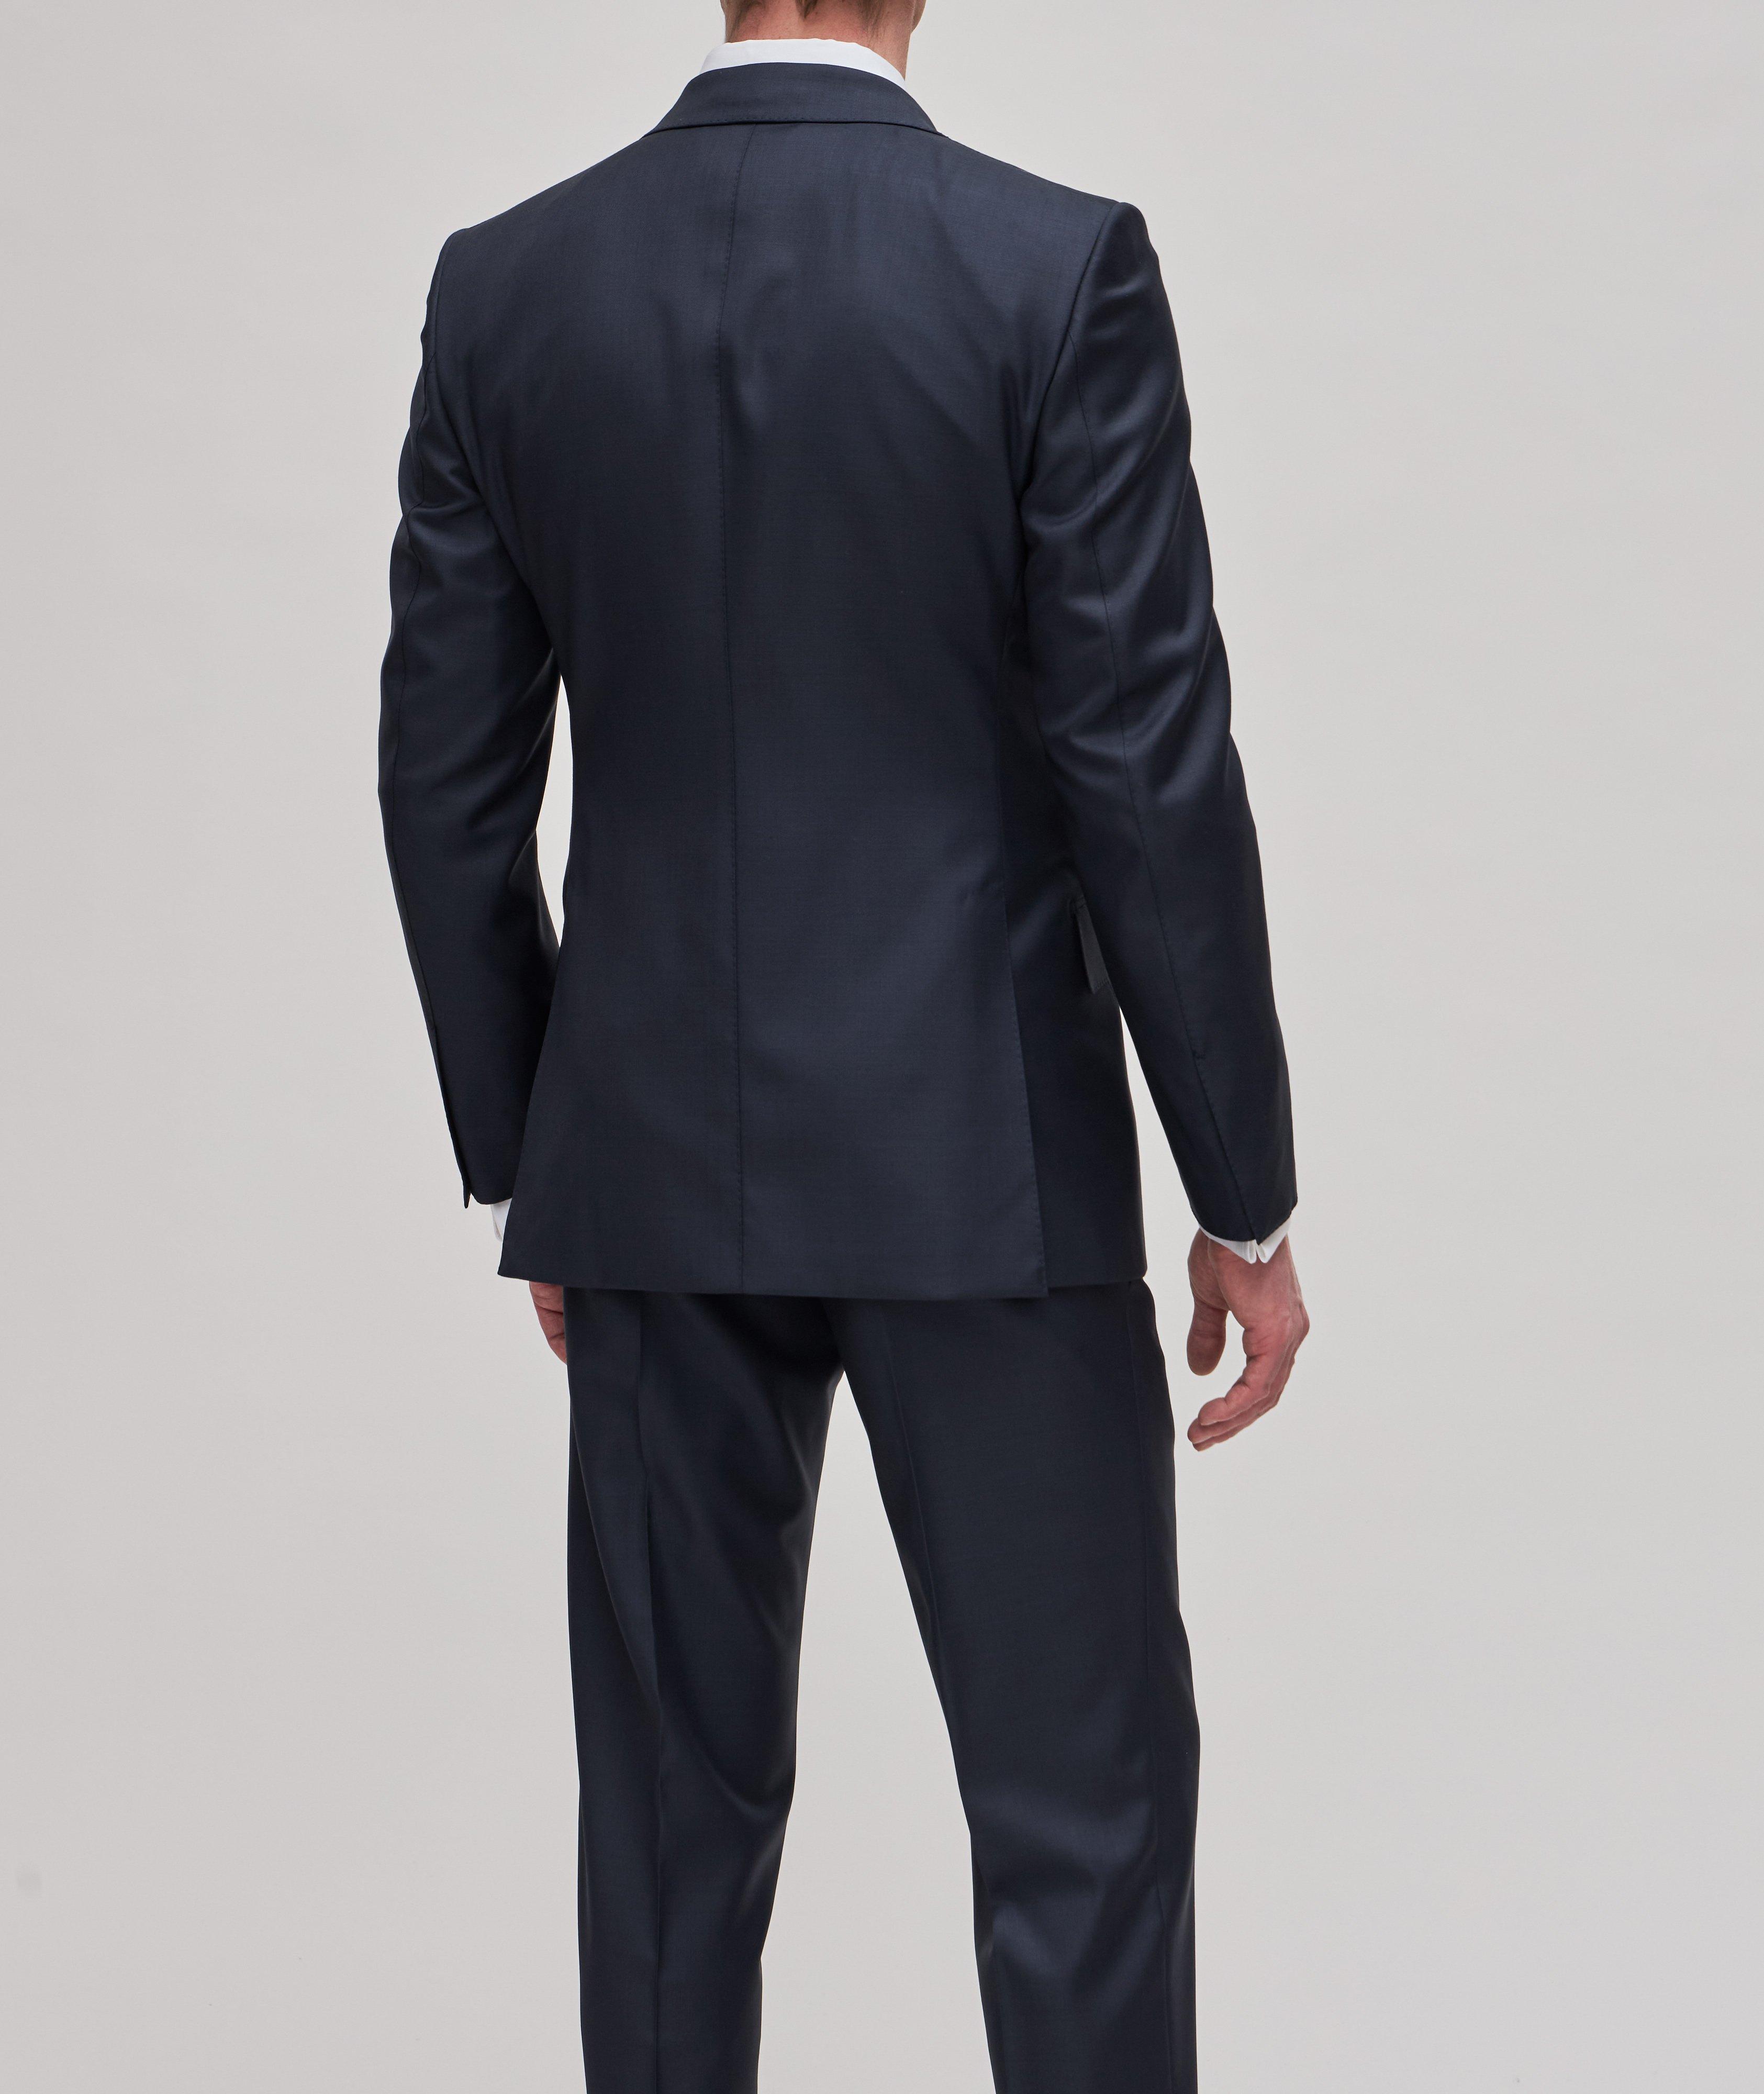 O'Connor Solid Wool Suit image 2